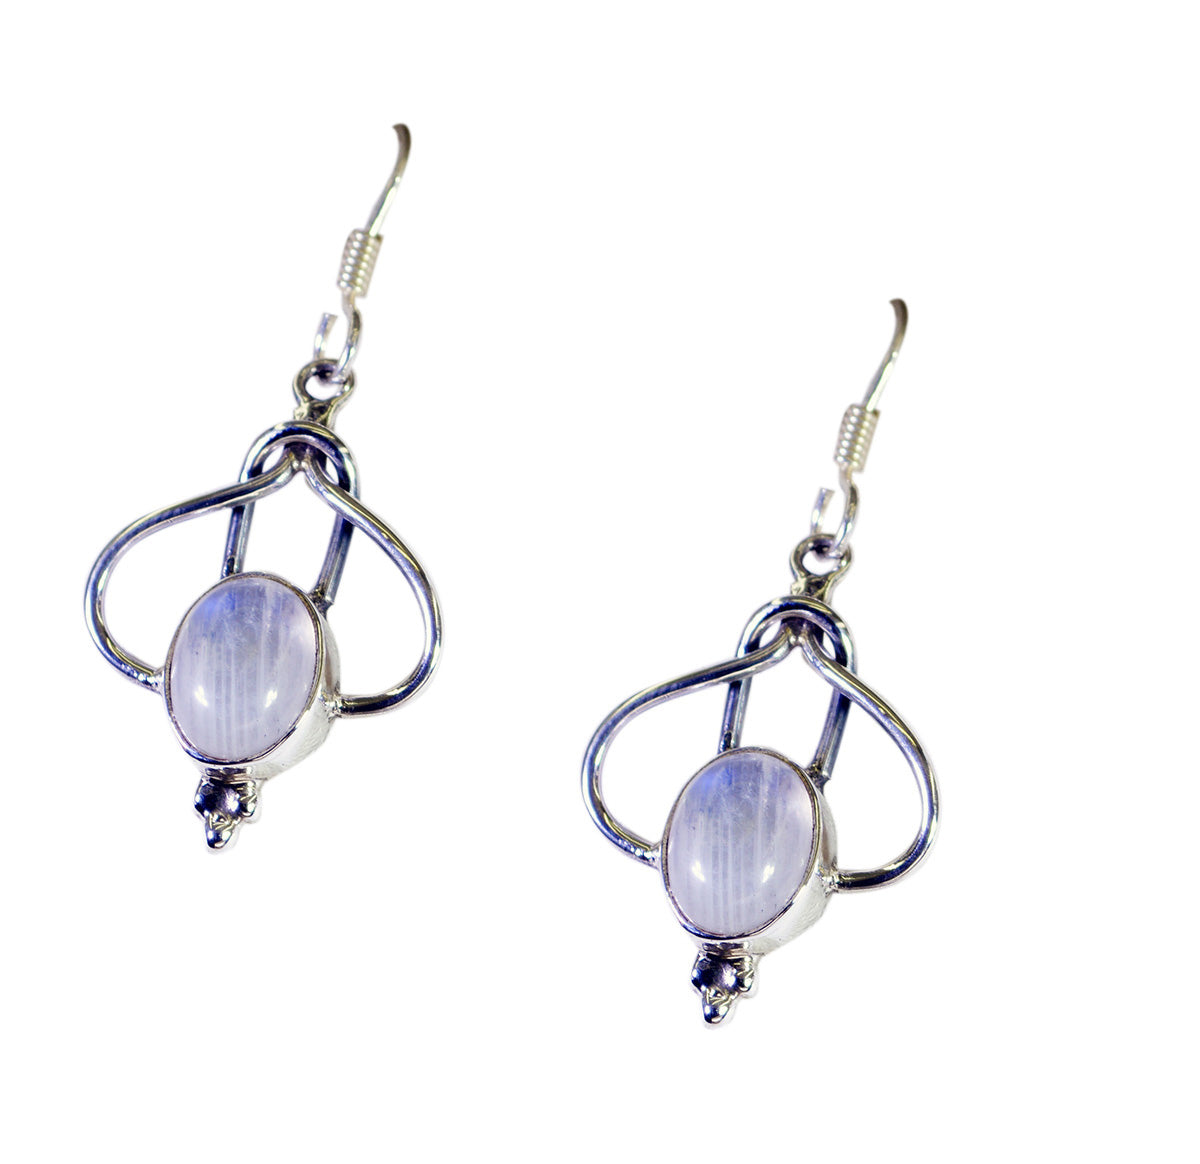 Riyo Real Gemstones round Cabochon White Rainbow Moonstone Silver Earrings gift for independence day